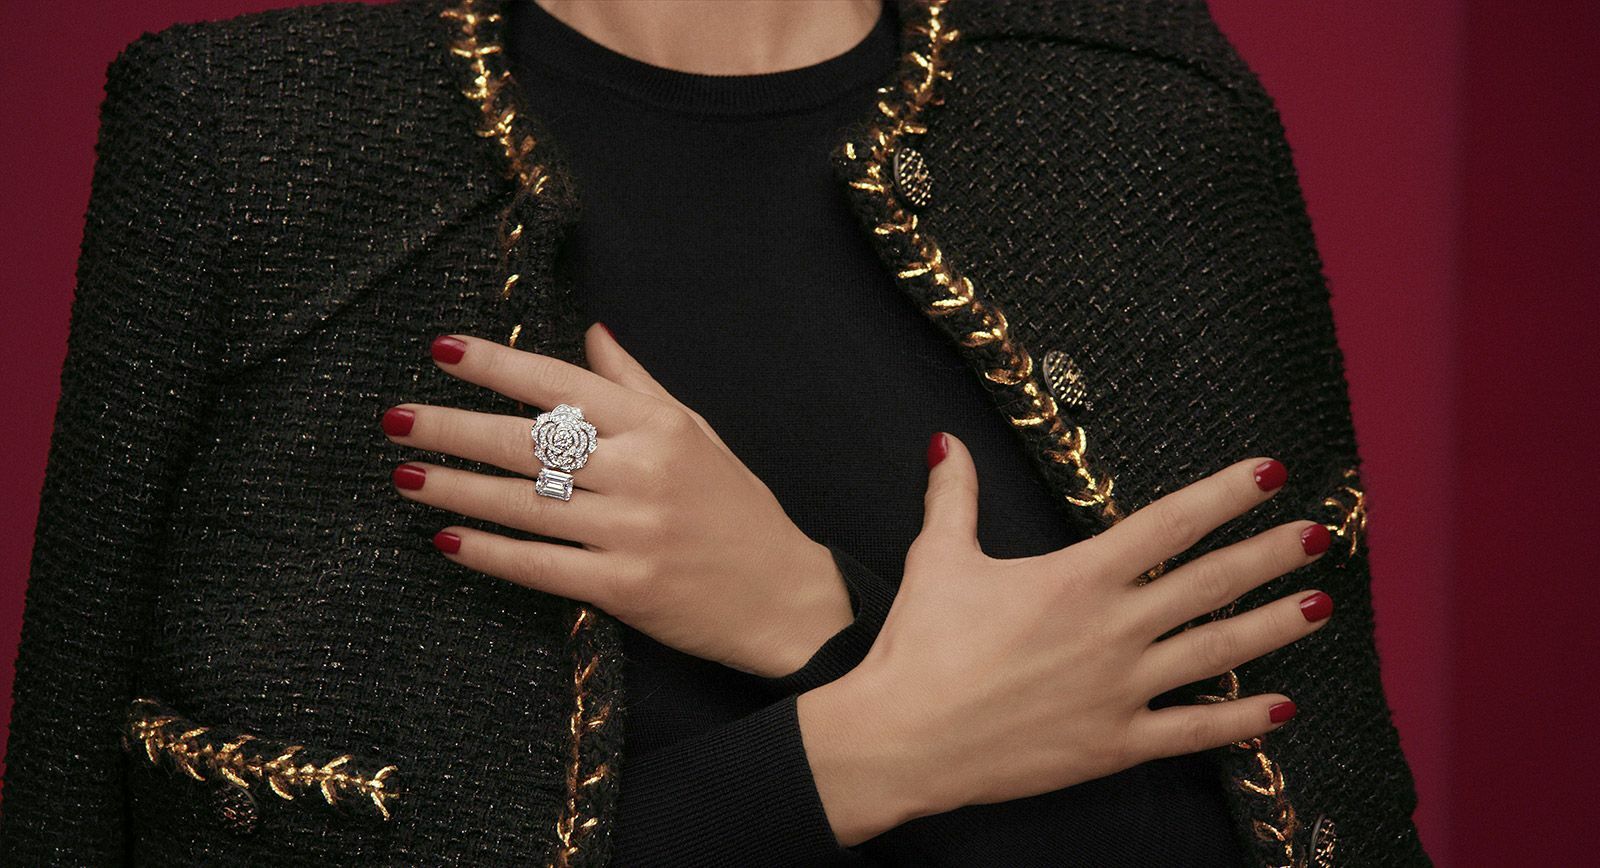 Asymmetric design in Chanel haute joaillerie 1.5 collection 'Contraste Blanc' ring